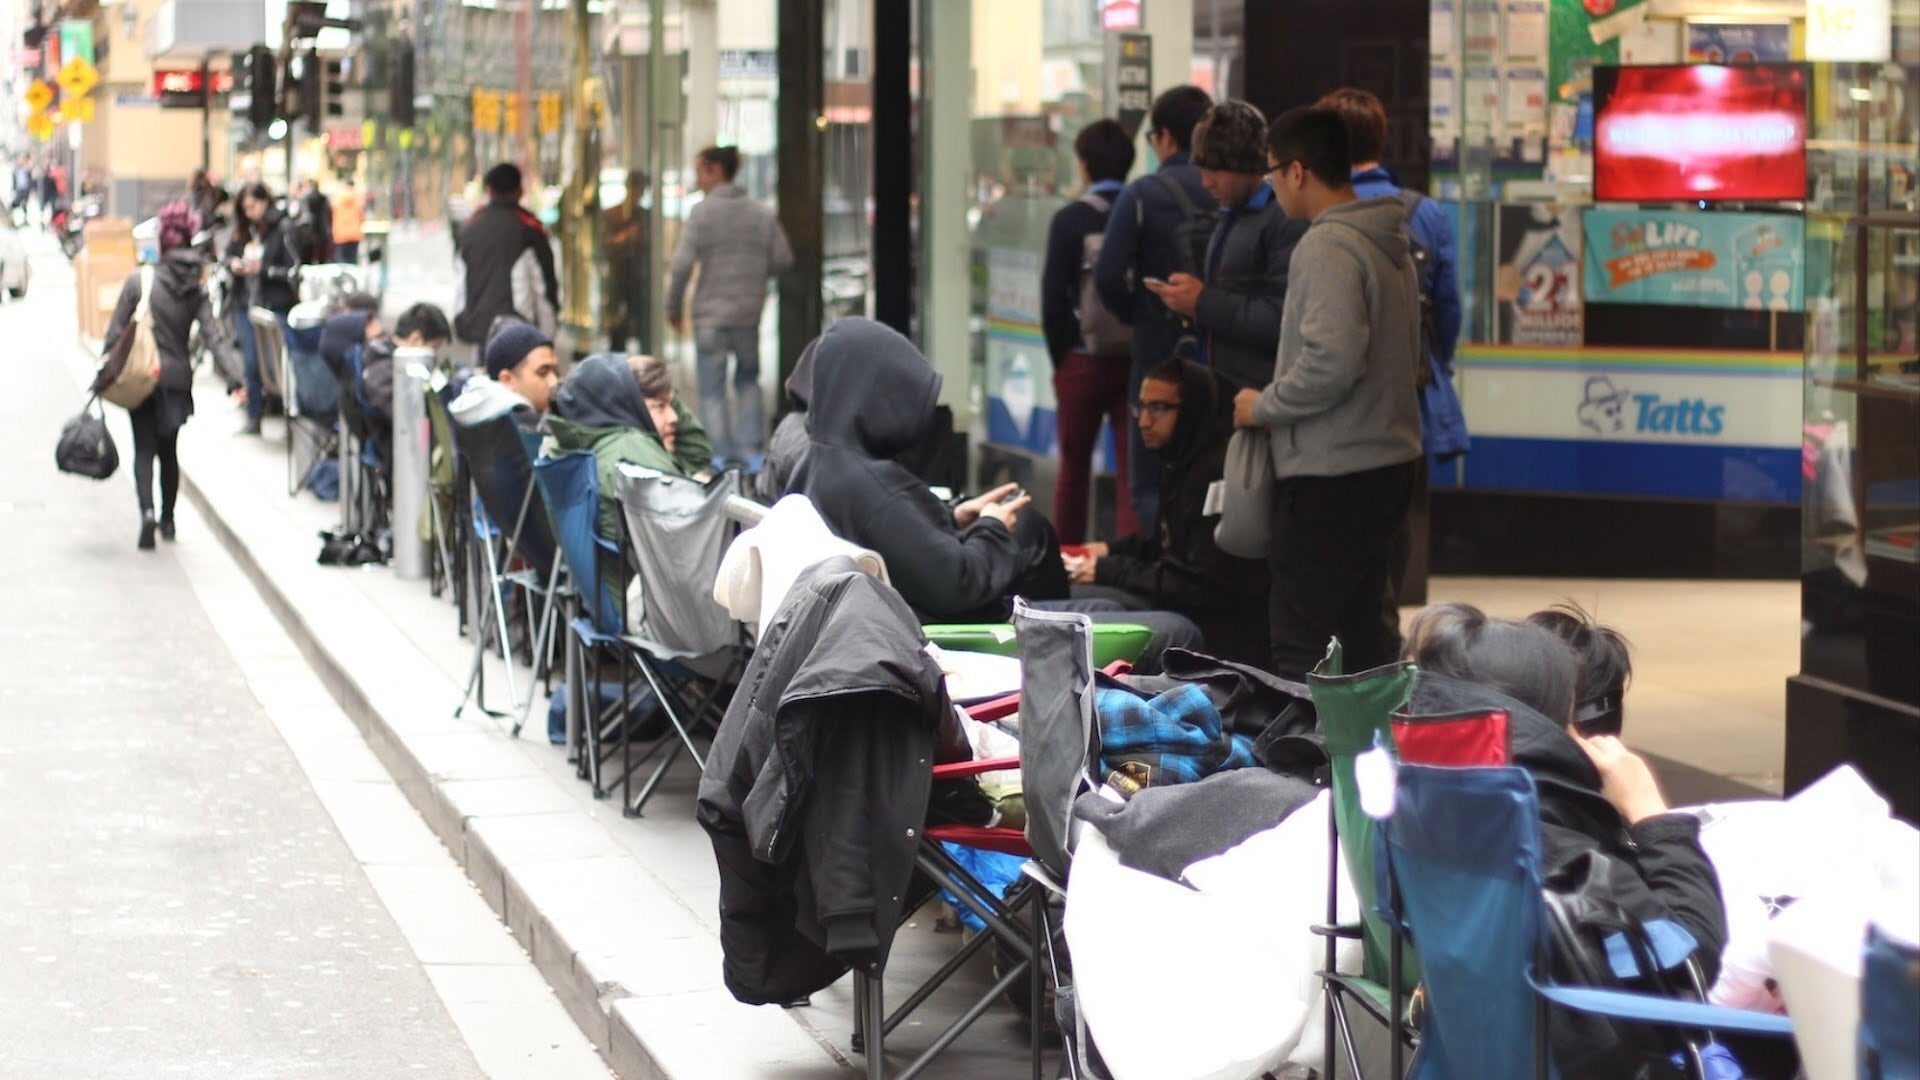 yeezy supply waiting in line to purchase